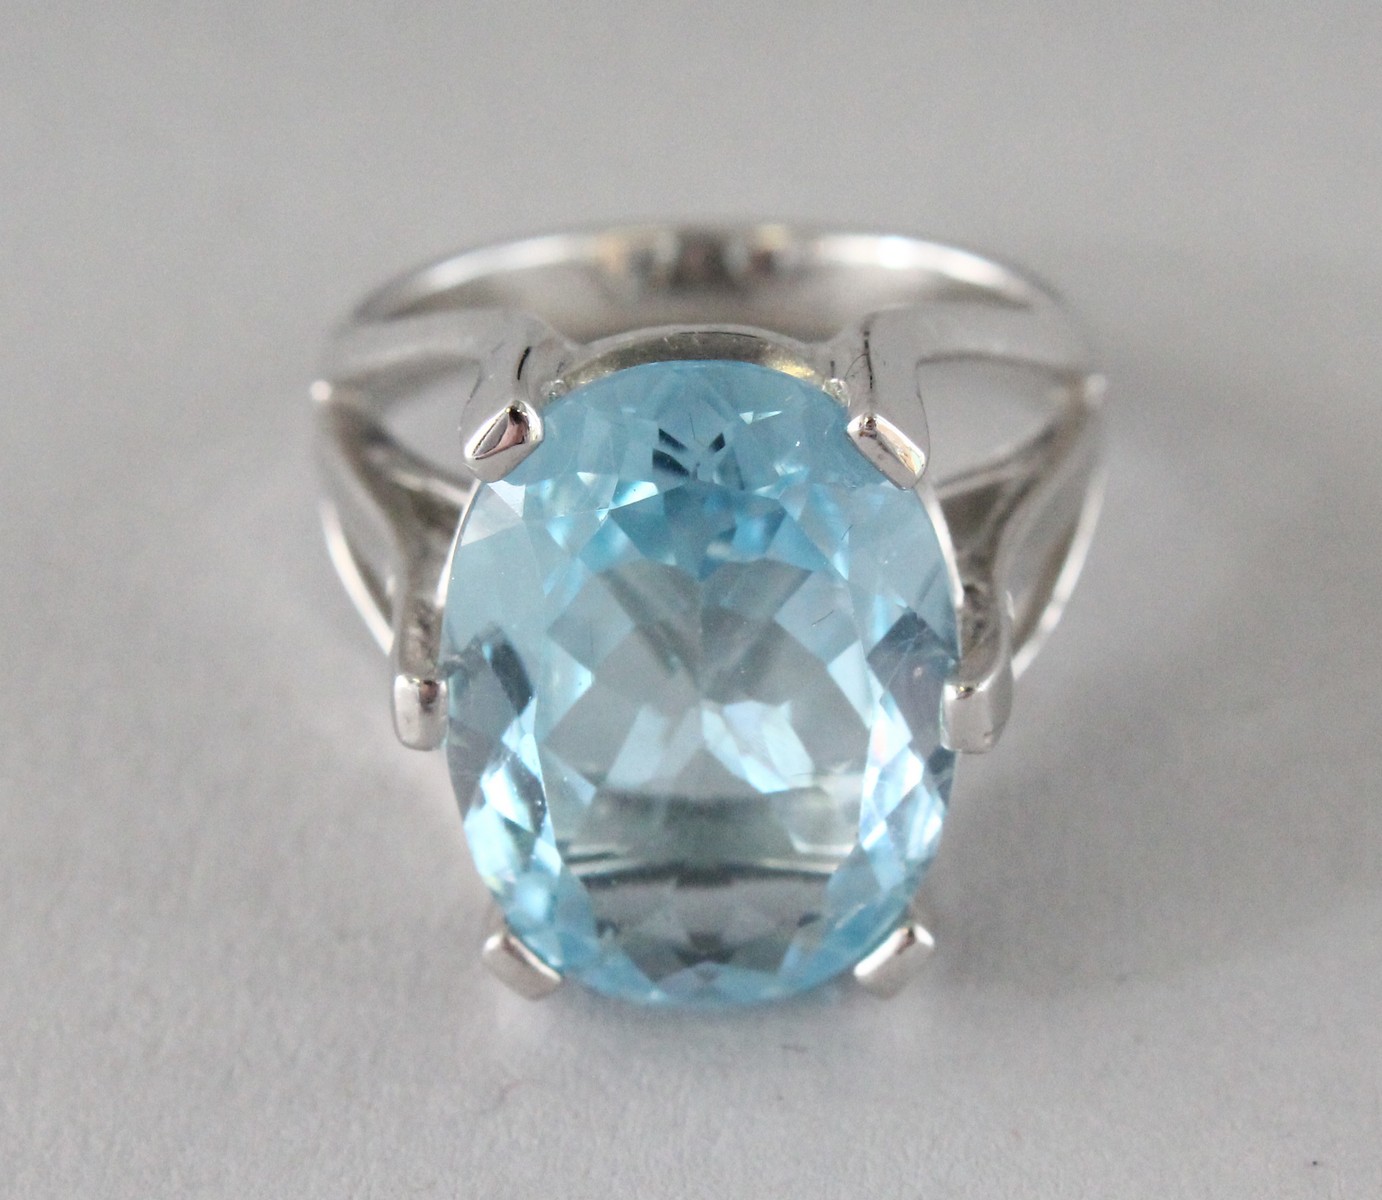 A SILVER LARGE OVAL CUT TOPAZ RING. - Image 3 of 4